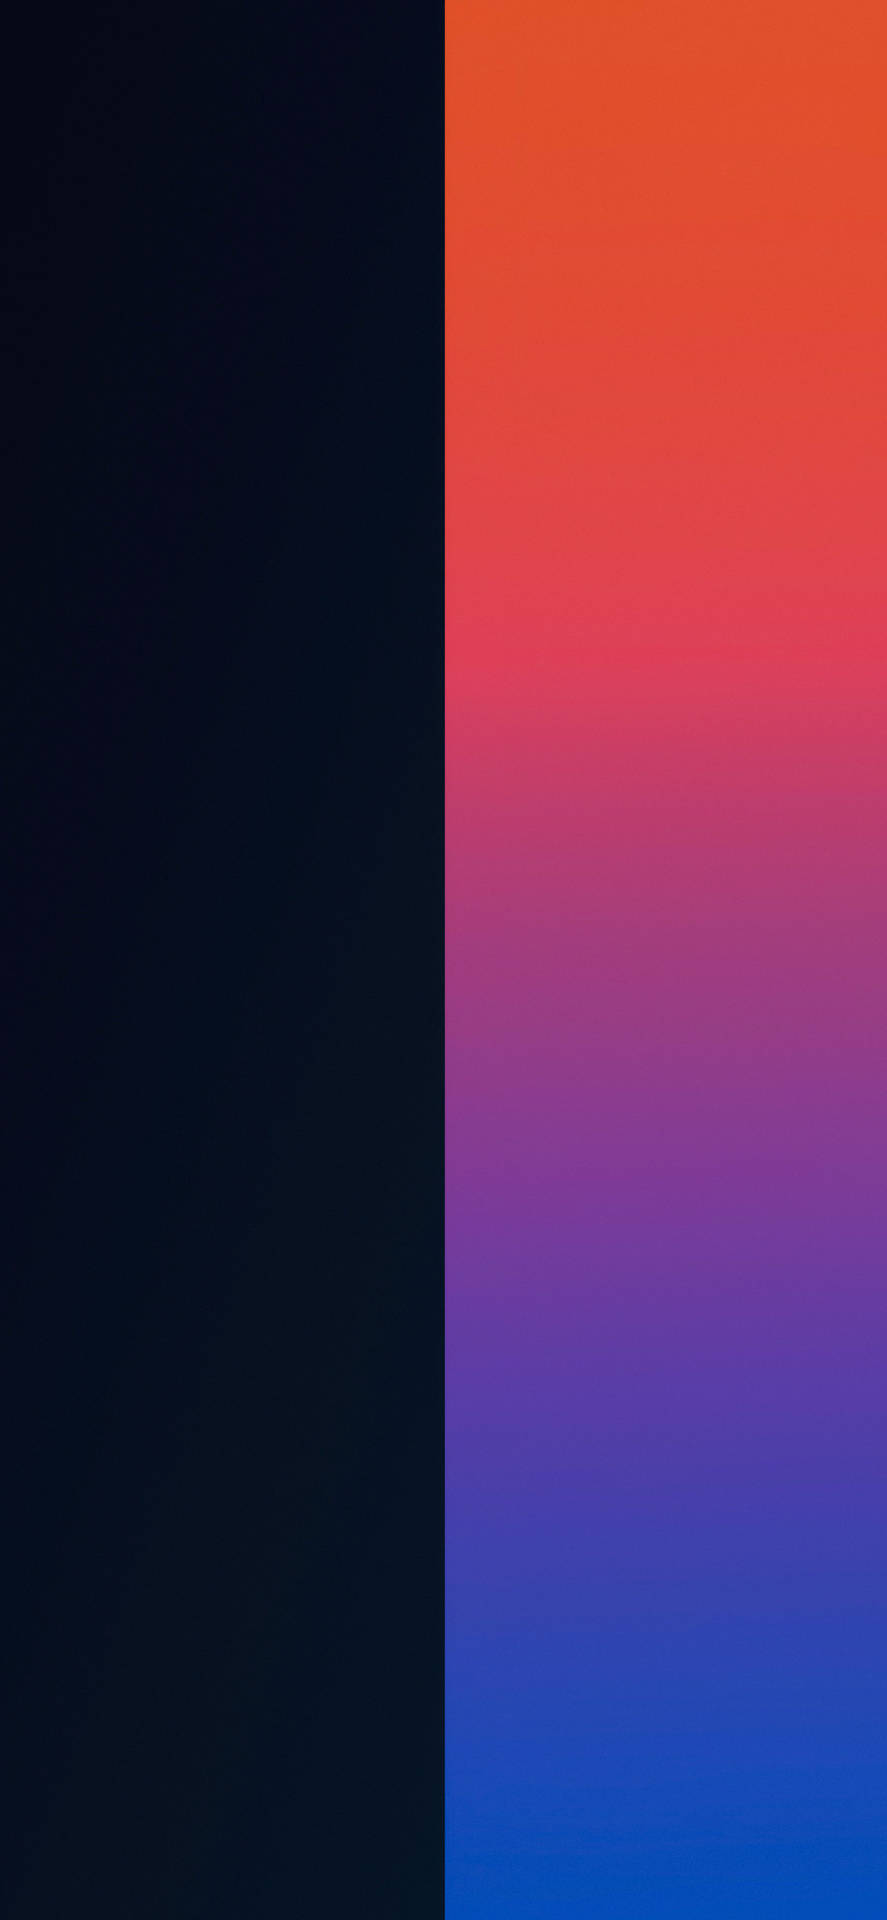 A Split Of Black And Rainbow Colors Background